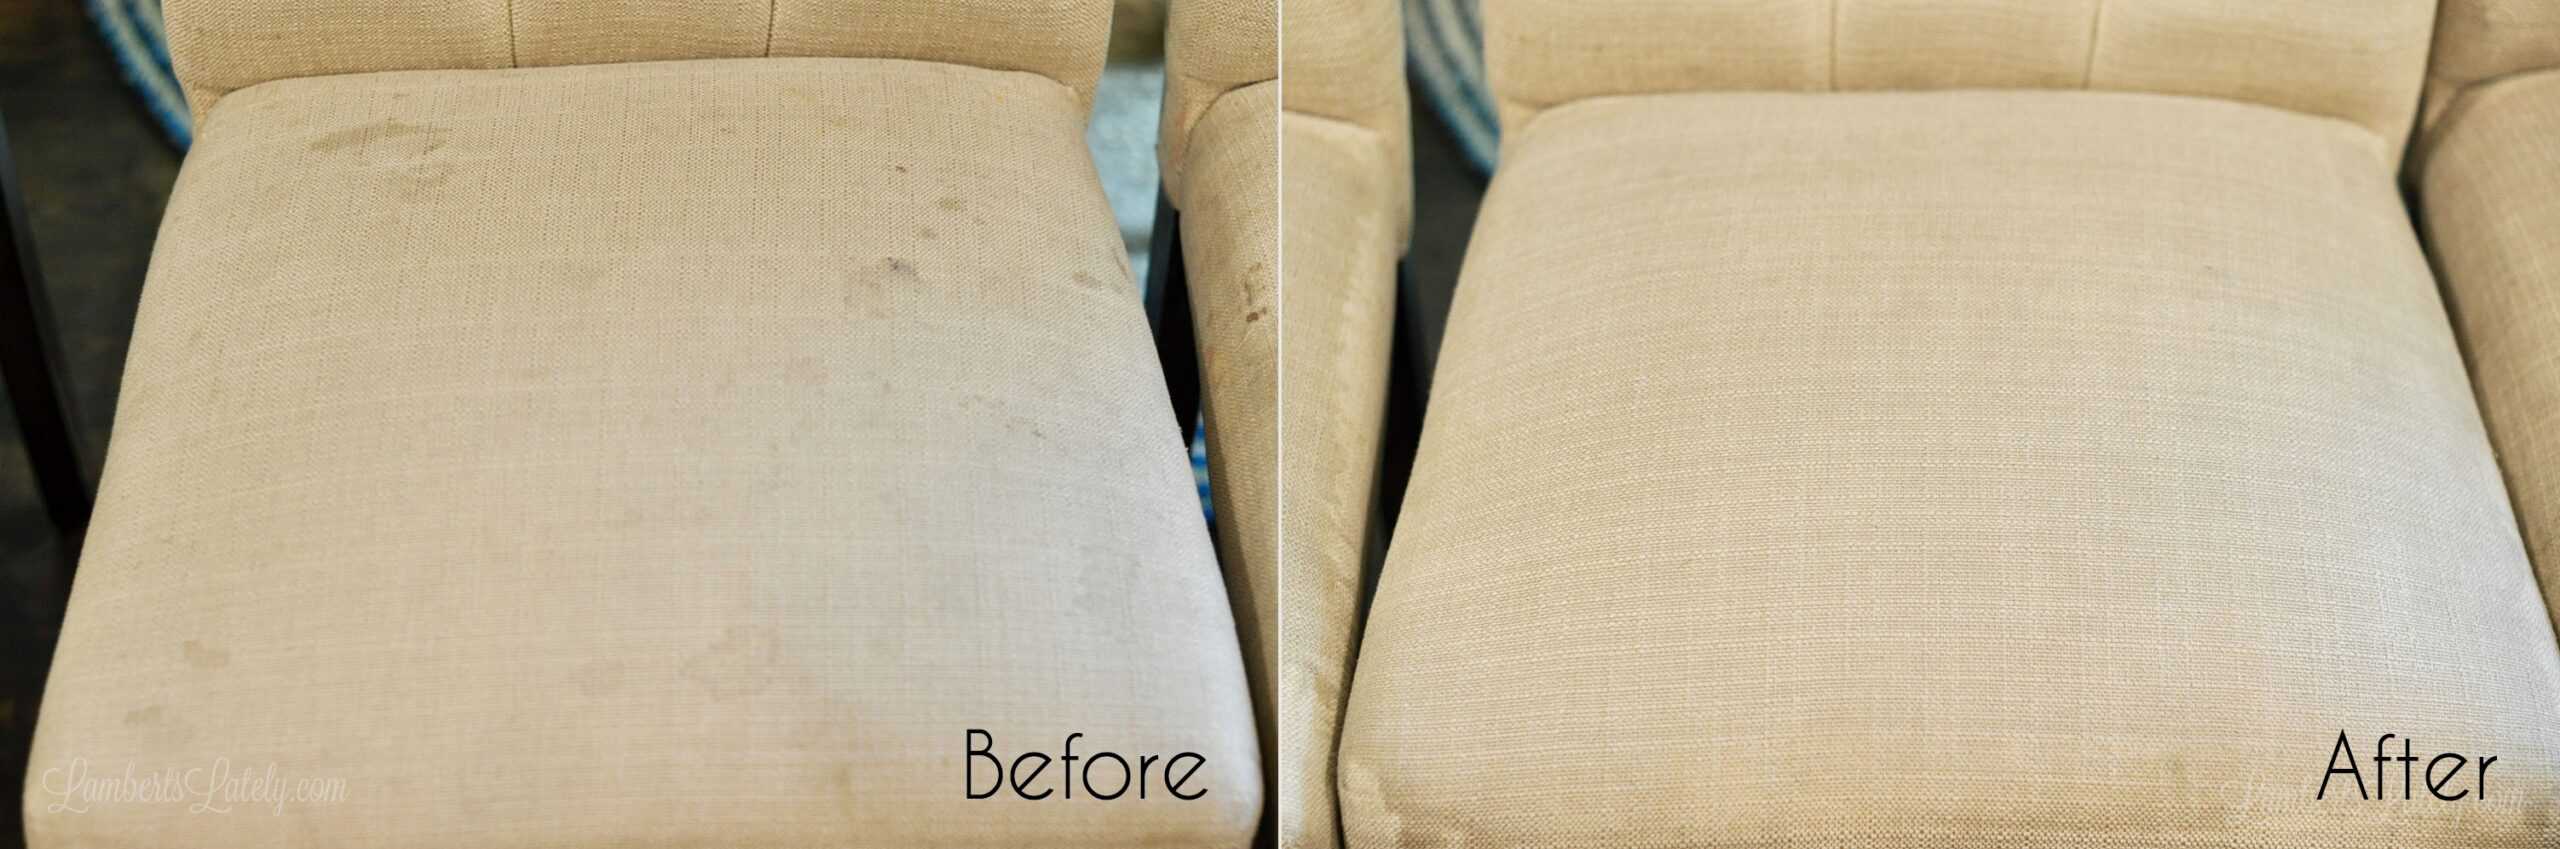 Cleaning 101: How to Clean Upholstered Furniture